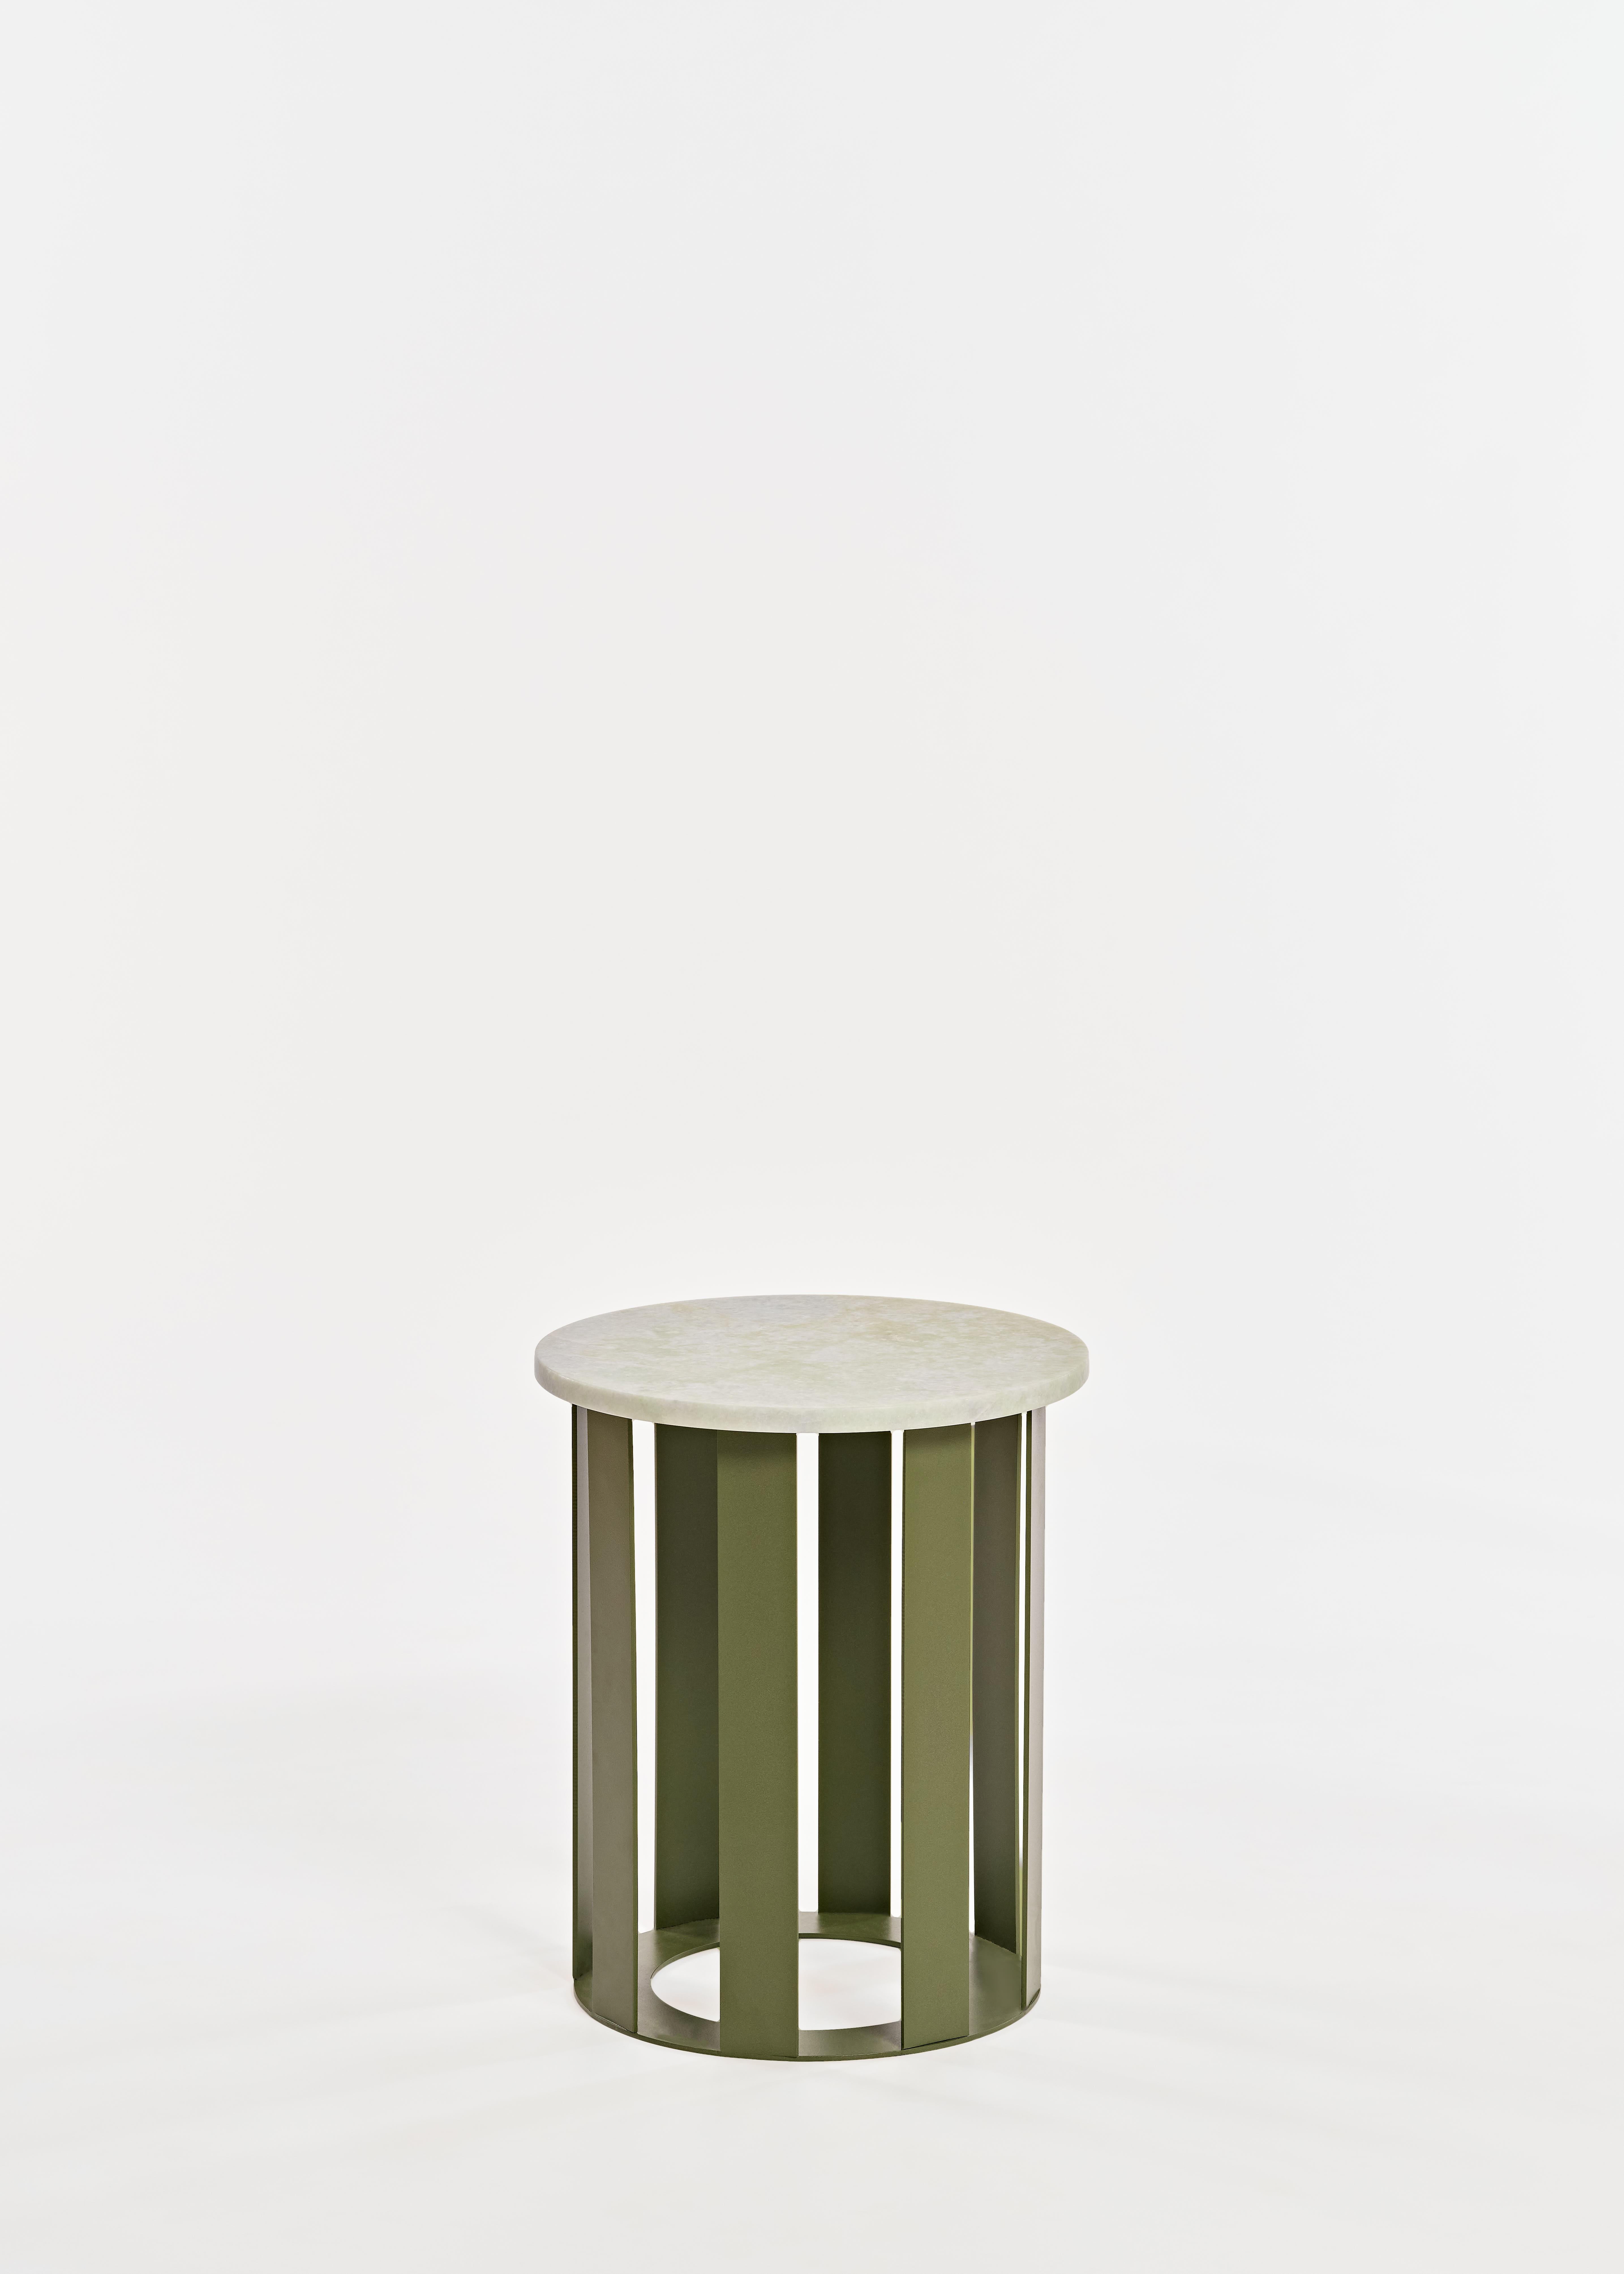 The Float series surfaces slightly overhang the rounded basket base. Perfect as a side table, nightstand, or stool. Such a nice piece. Powder coated metal base; terrazzo stone top.

Customize your own with our assortment of surface and color